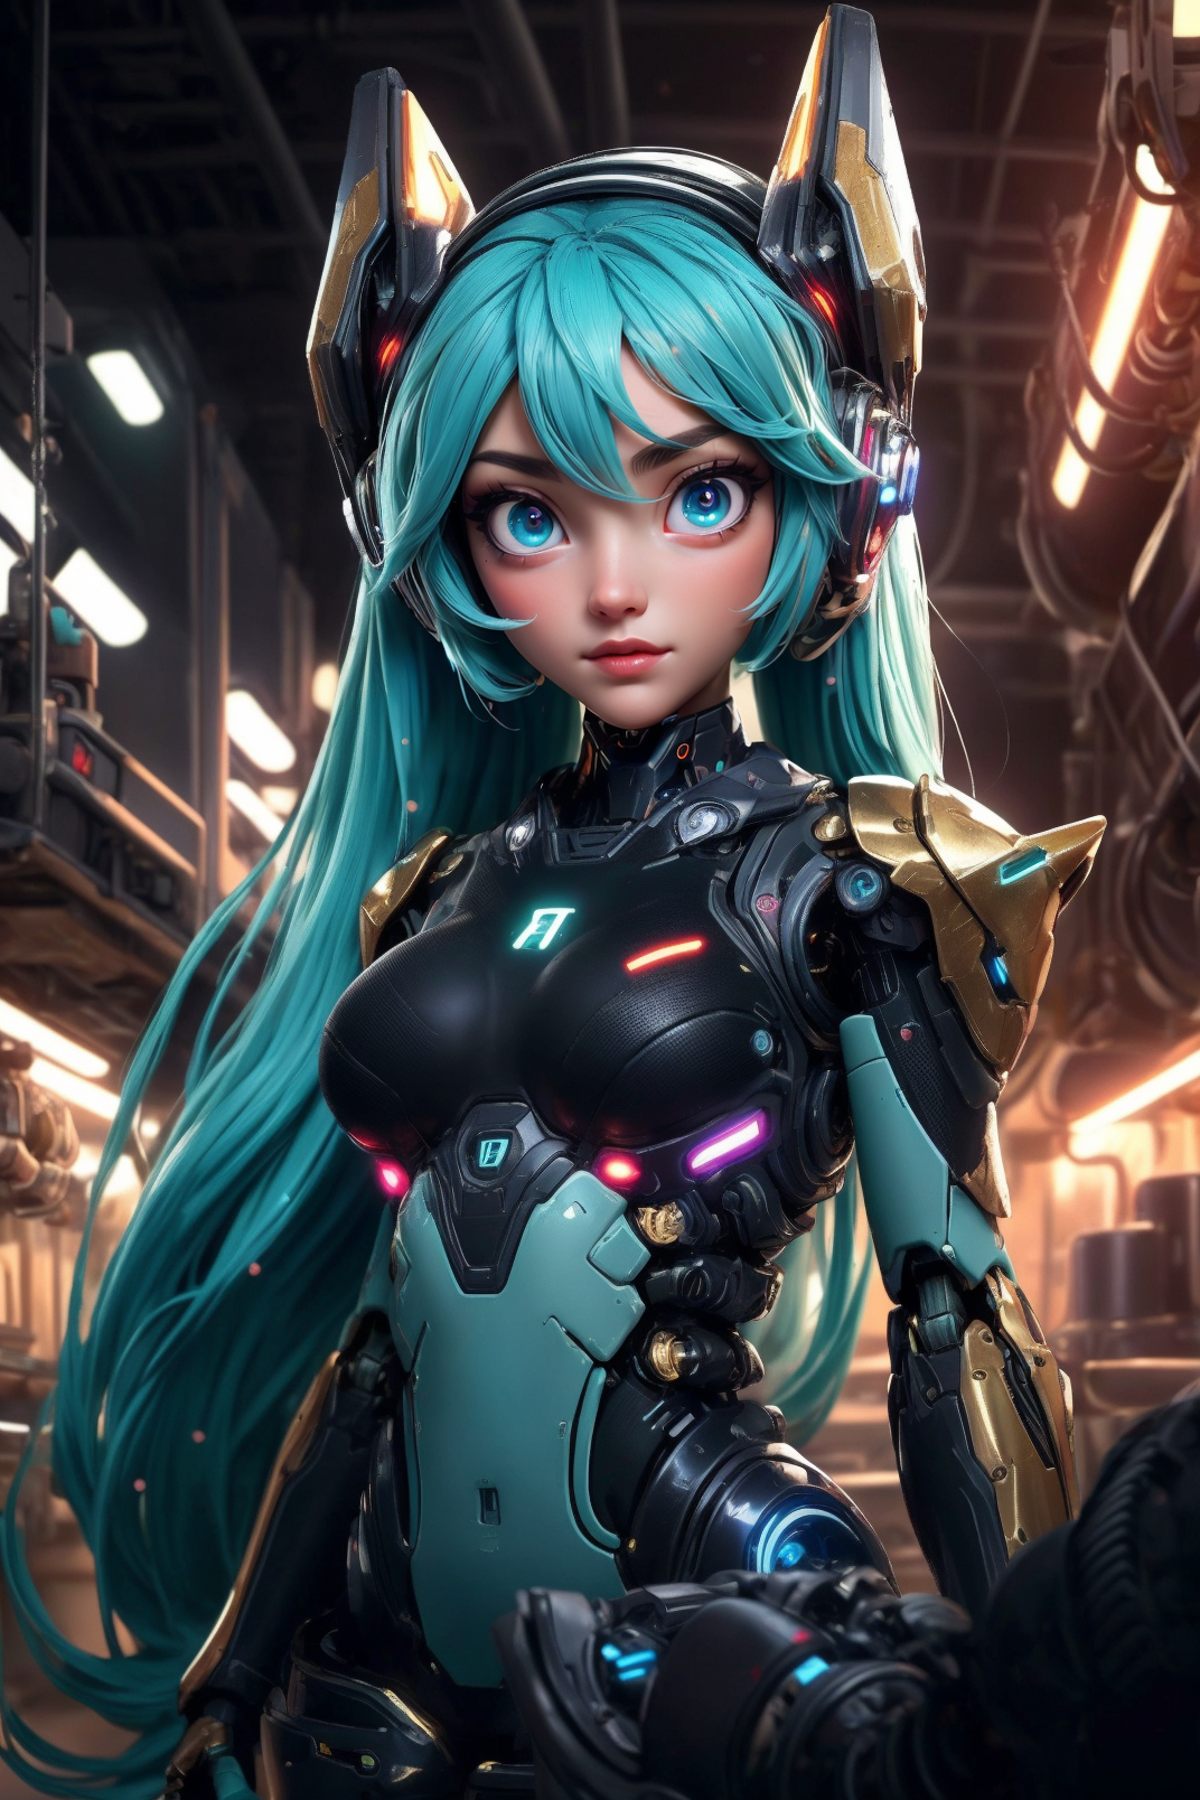 Digital Art Anime Character with Blue Eyes, Gold Armor, and Blue Hair.